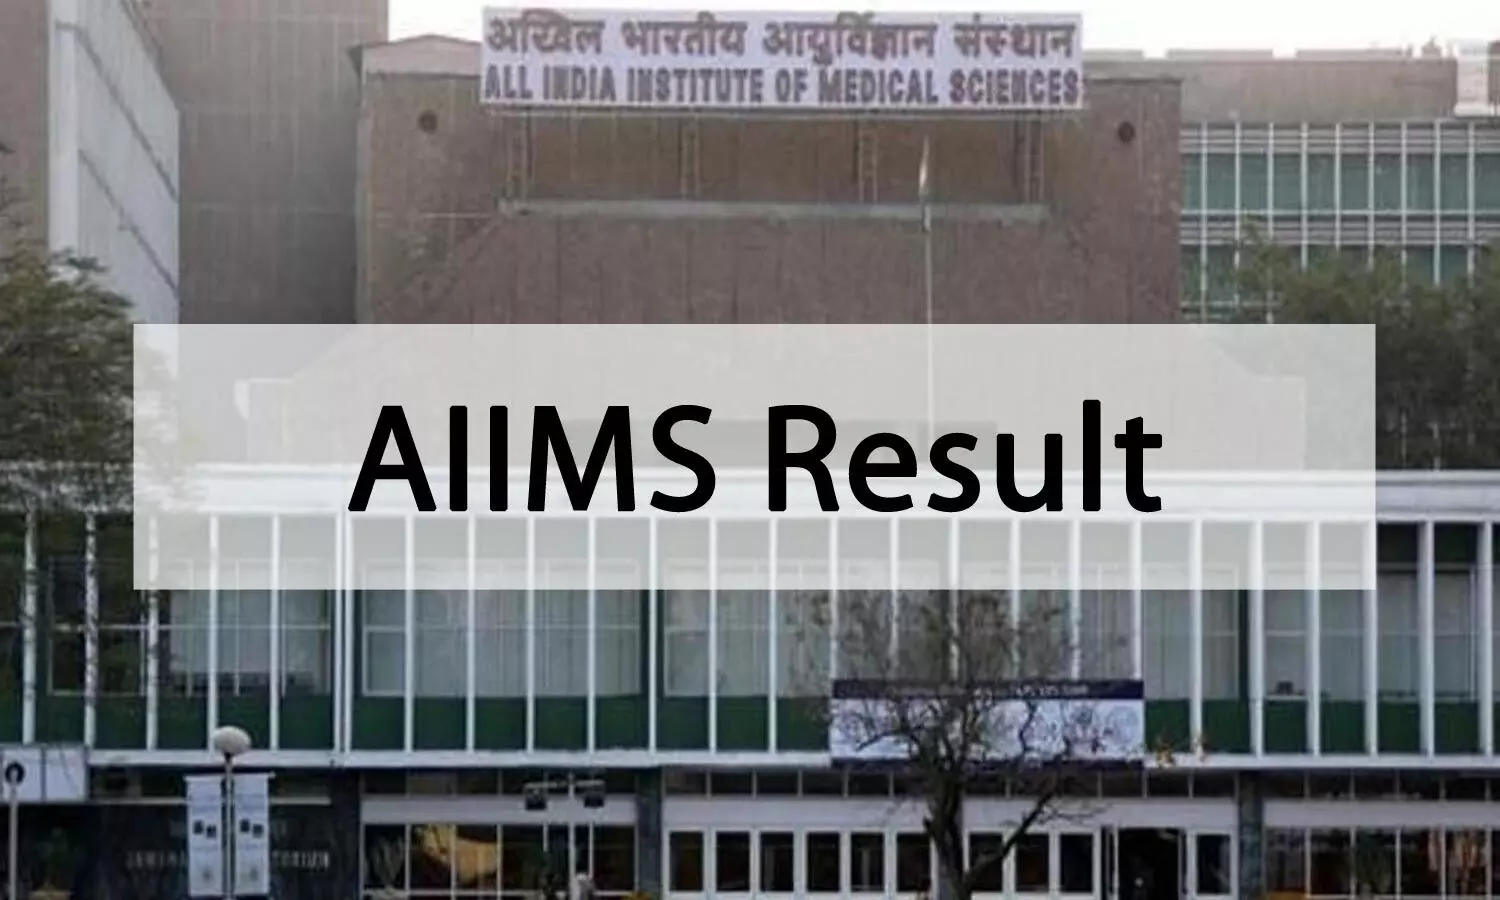 AIIMS releases Result of Stage I Online CBT Entrance Exam for Fellowship Programme January 2021